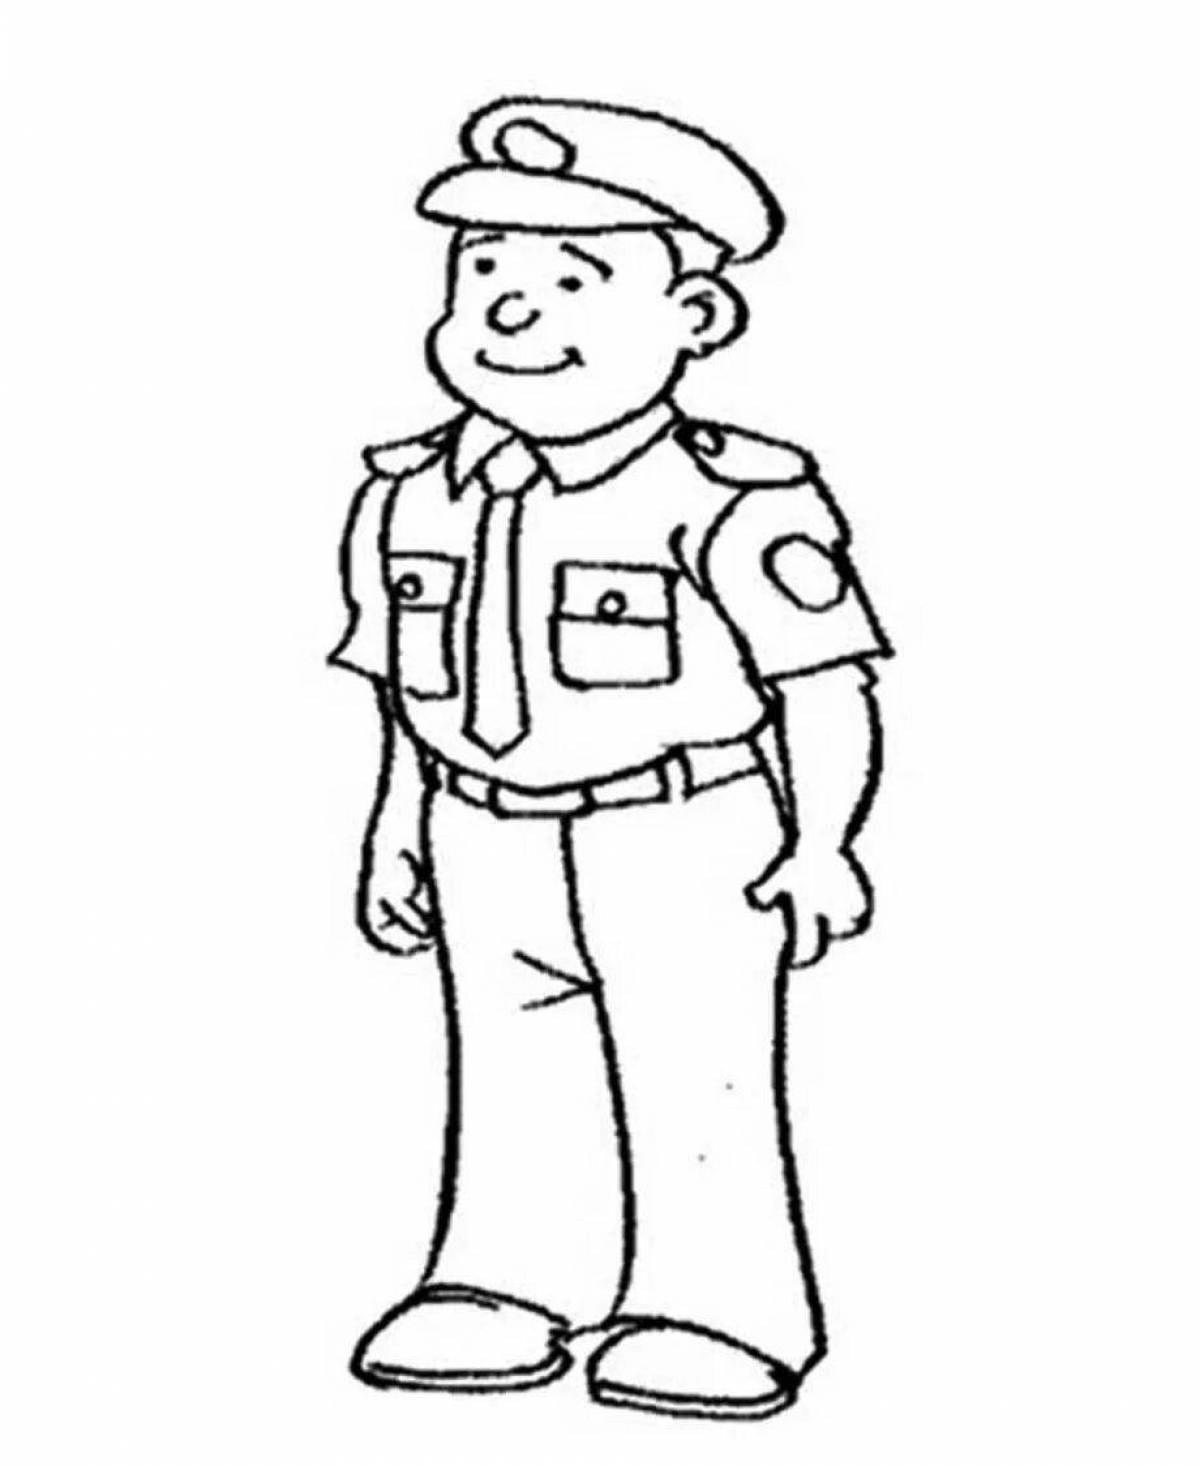 Coloring book fabulous police profession